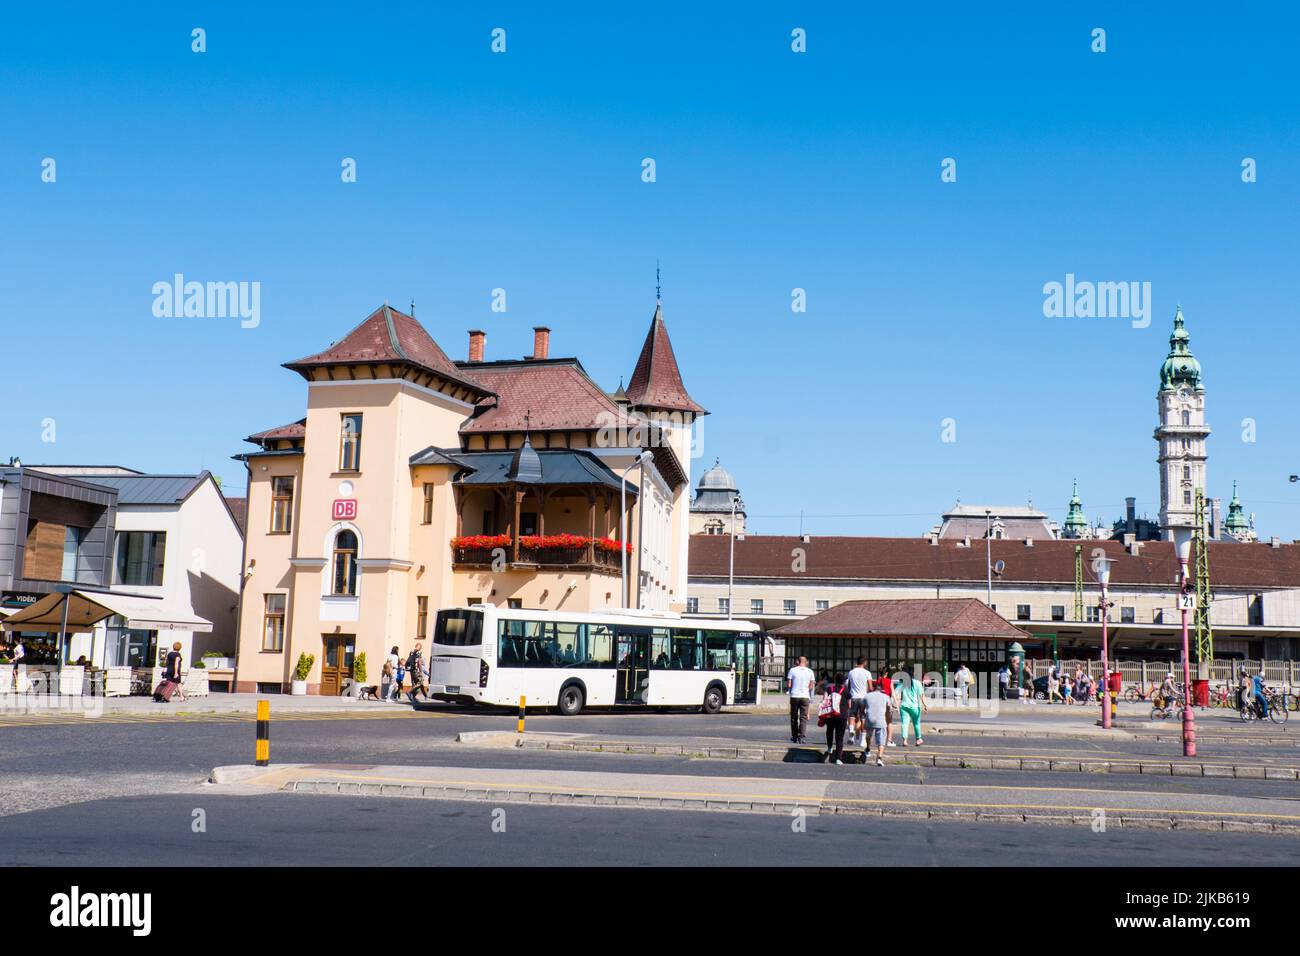 Bus station, with railway station in background, Gyor, Hungary Stock Photo